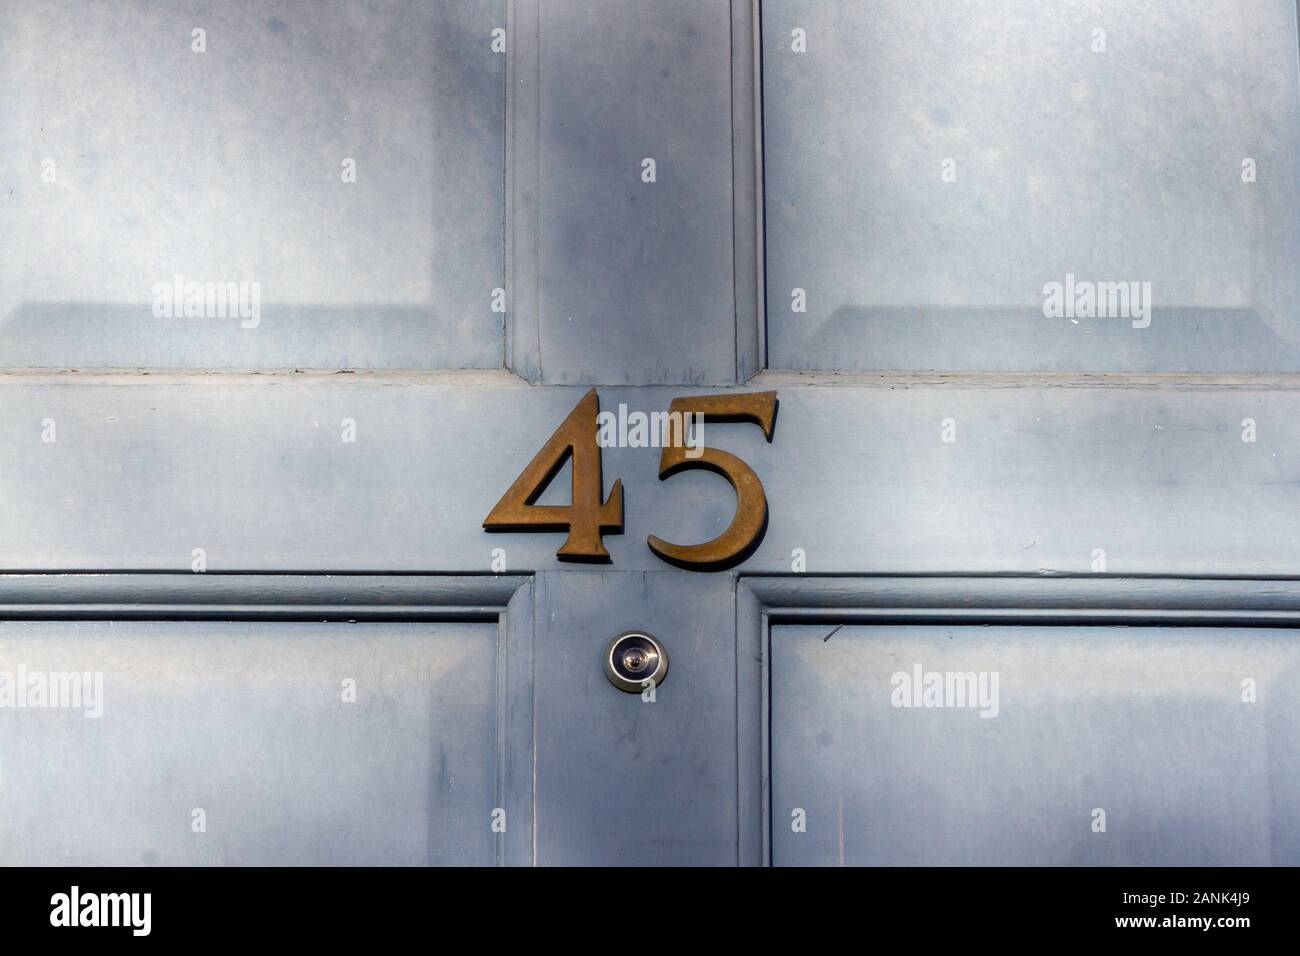 House number 45 Stock Photo